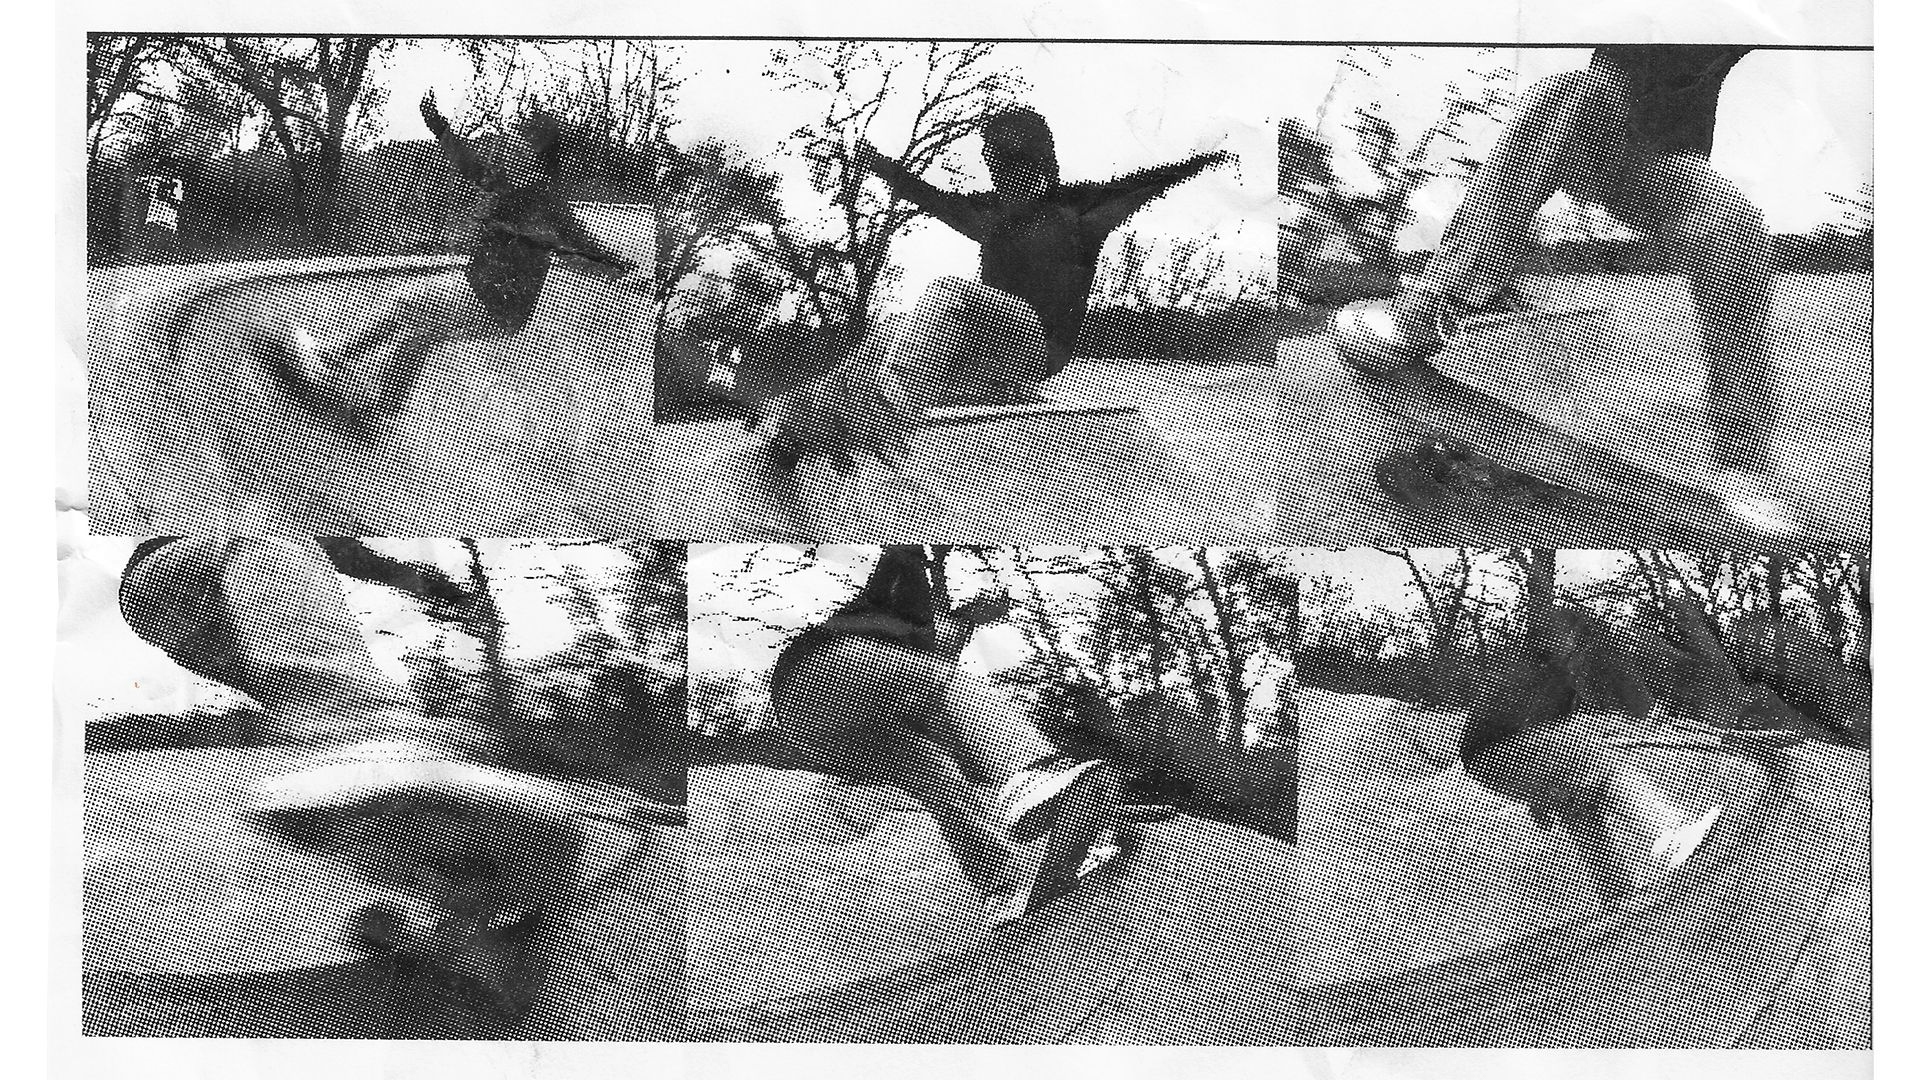 A skater grinds in six shots for the Vans The Wayvee Campaign